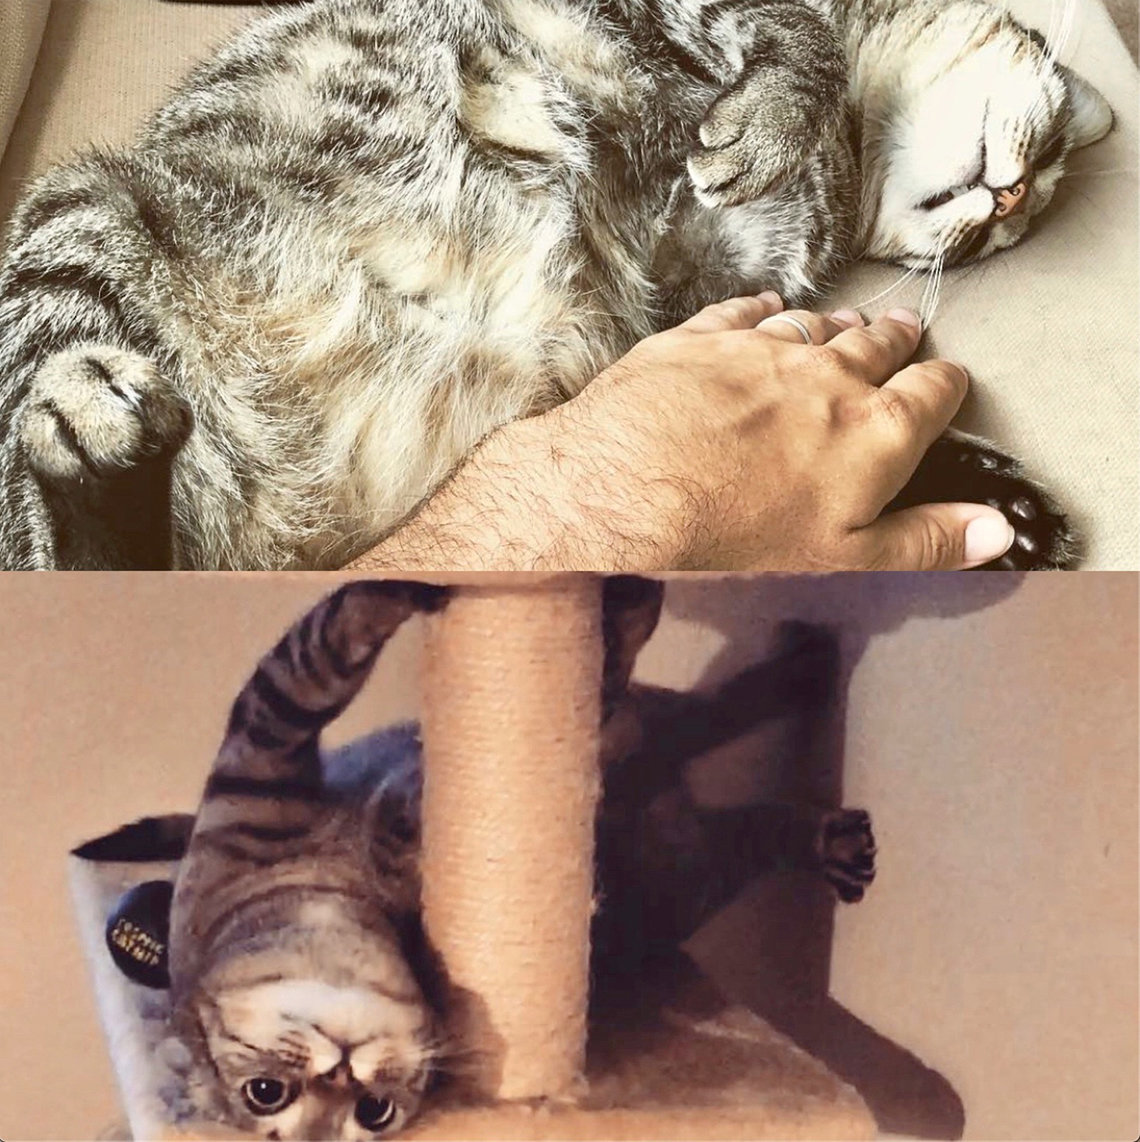 Cat gets a belly rub on his perch and second photo shows same cat, looking frustrated while clawing on his cat tree.